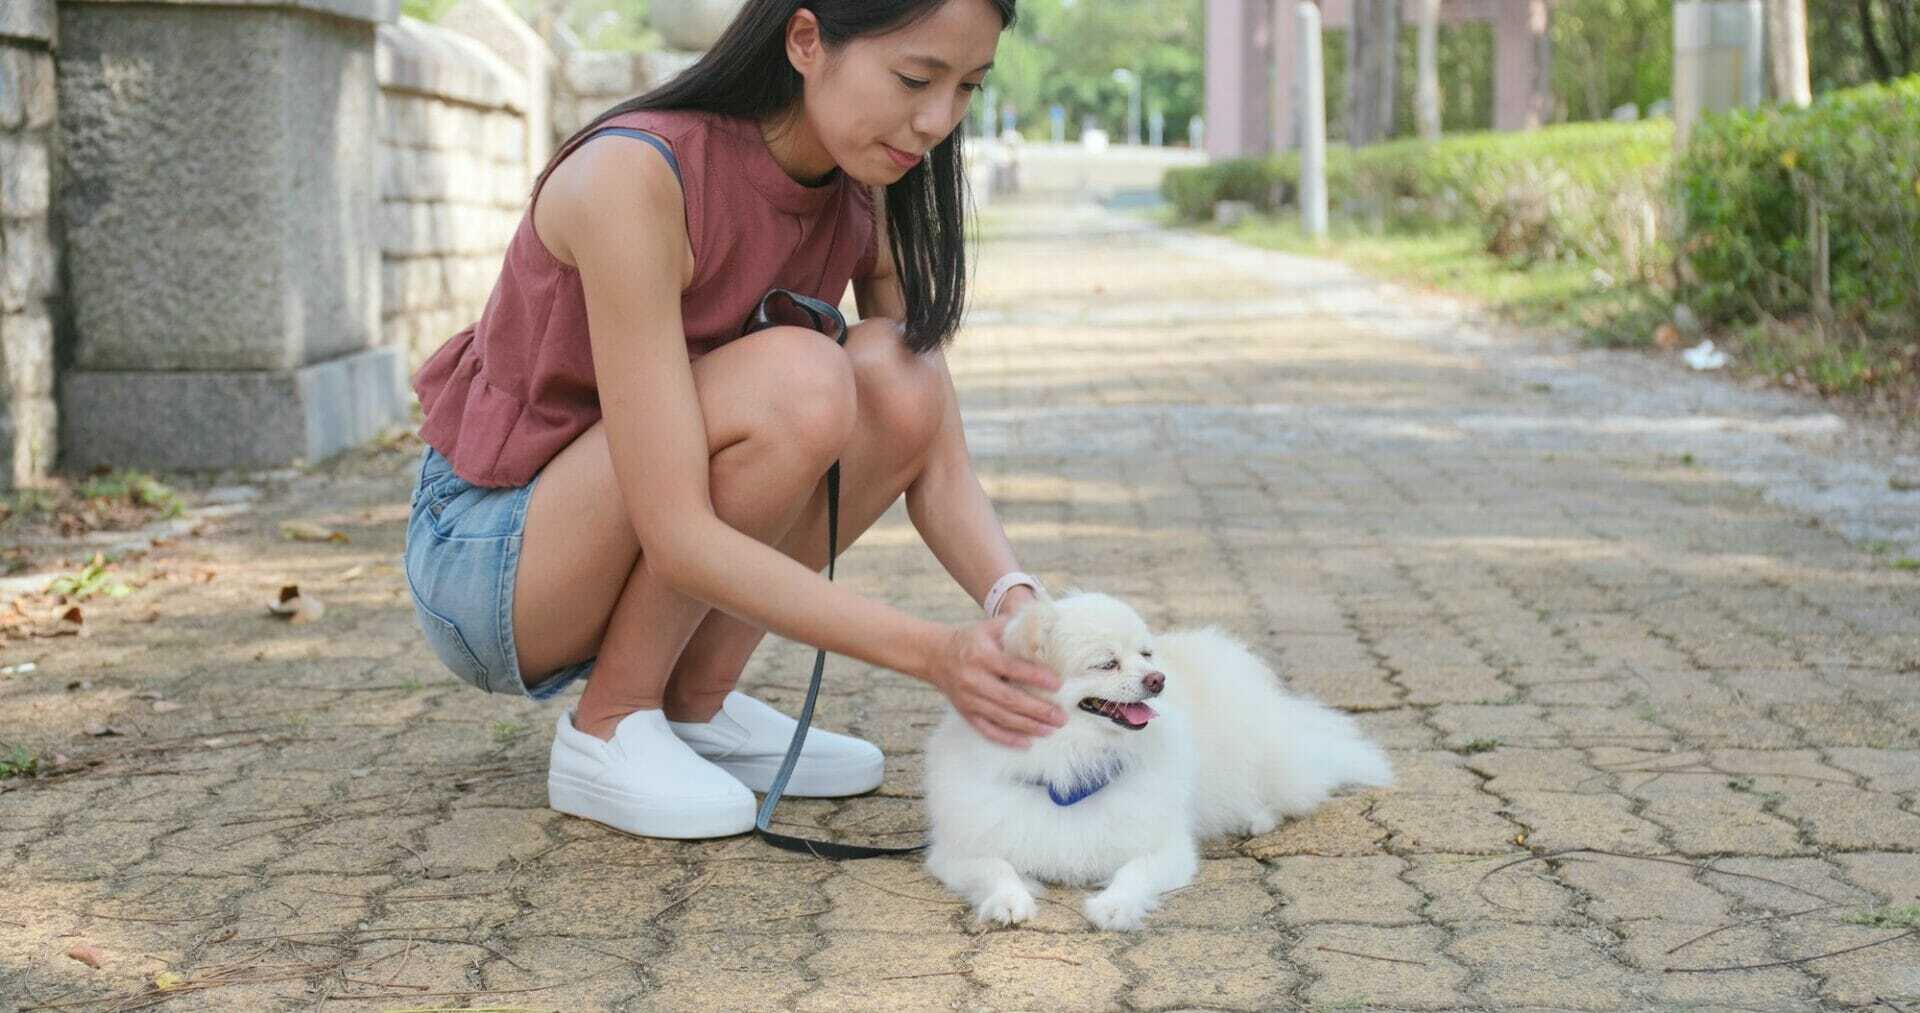 dog play with woman at outdoor